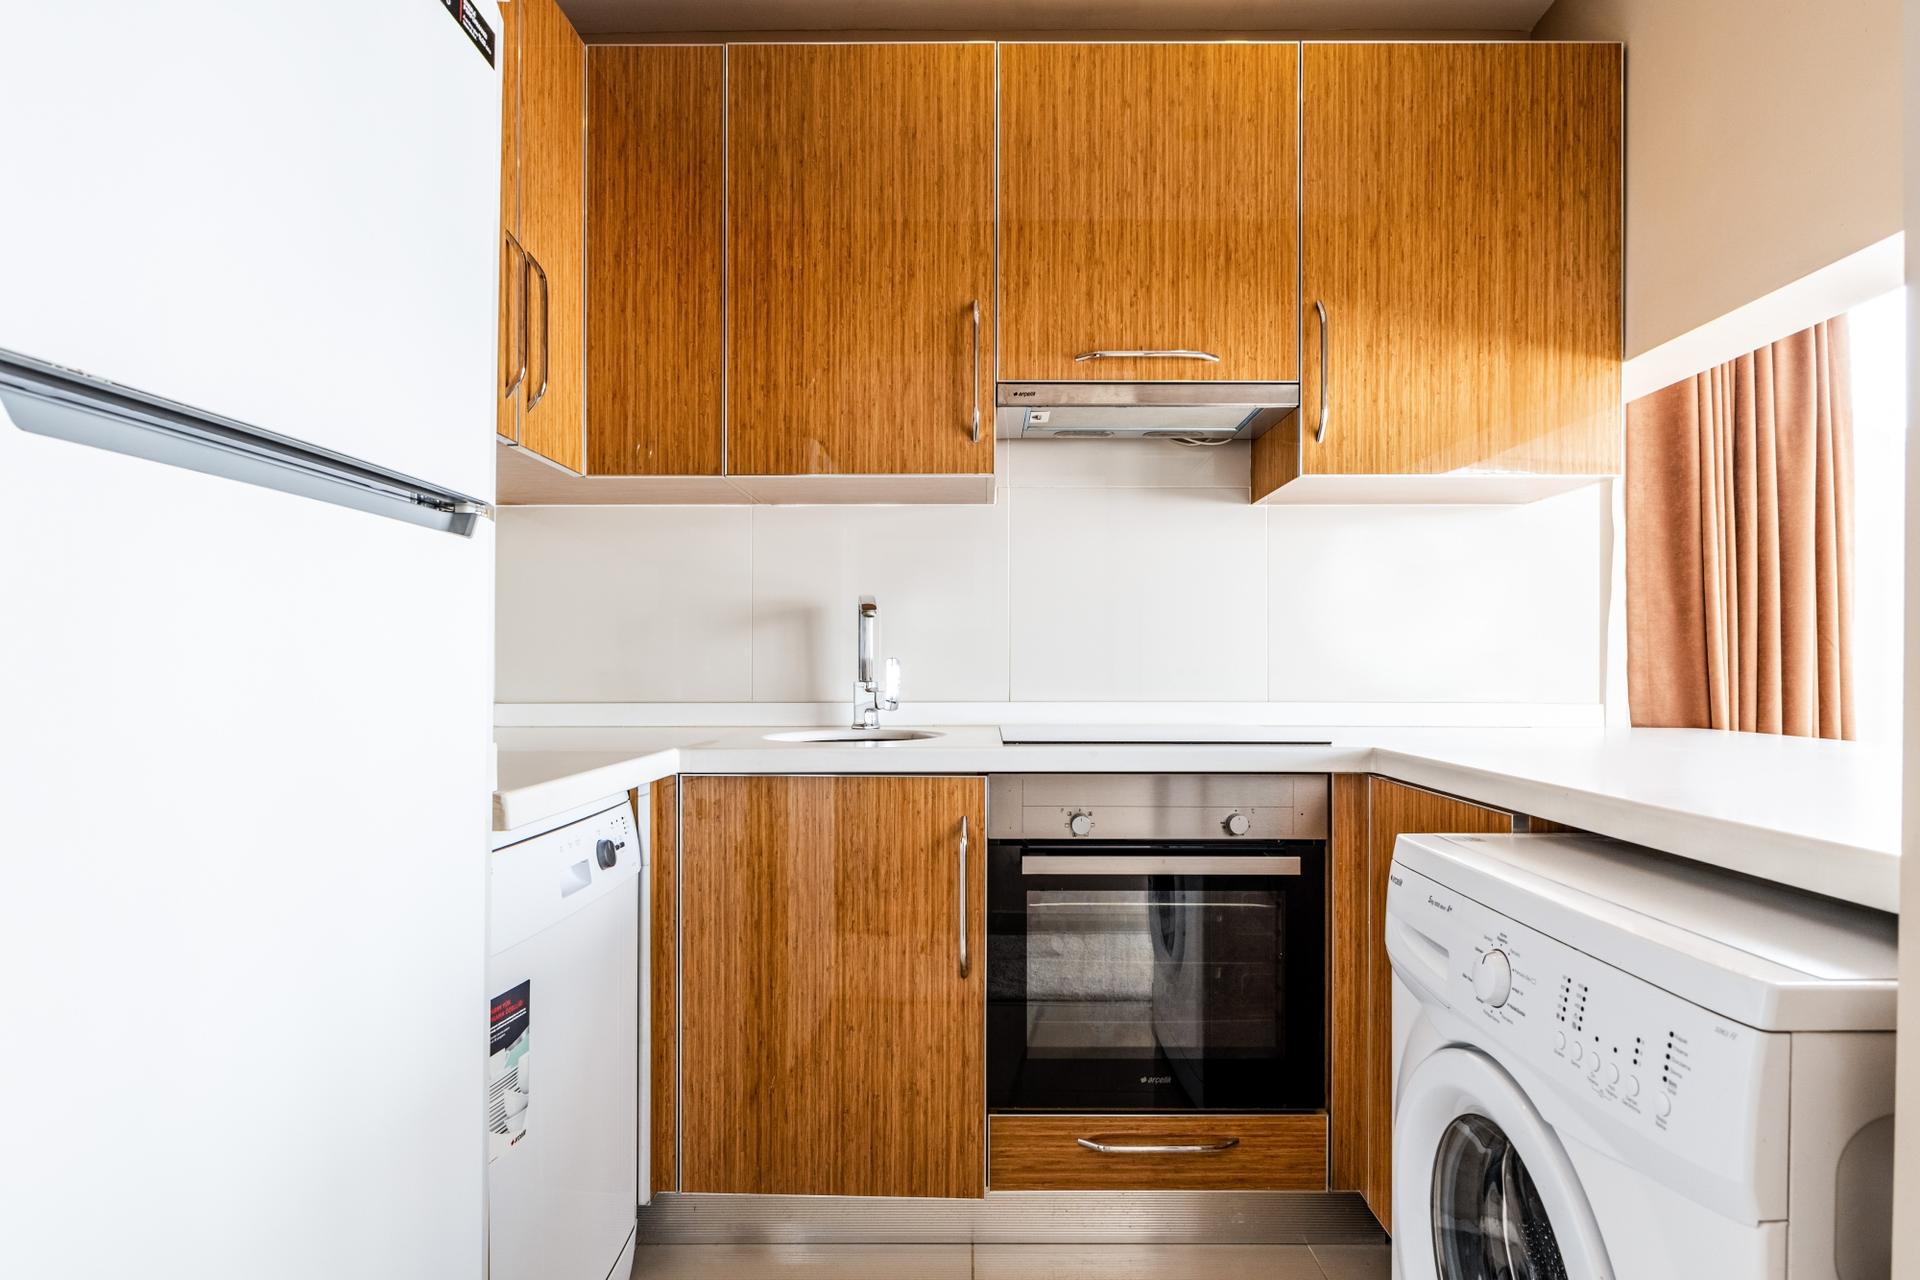 Our kitchen also includes modern appliances for you!